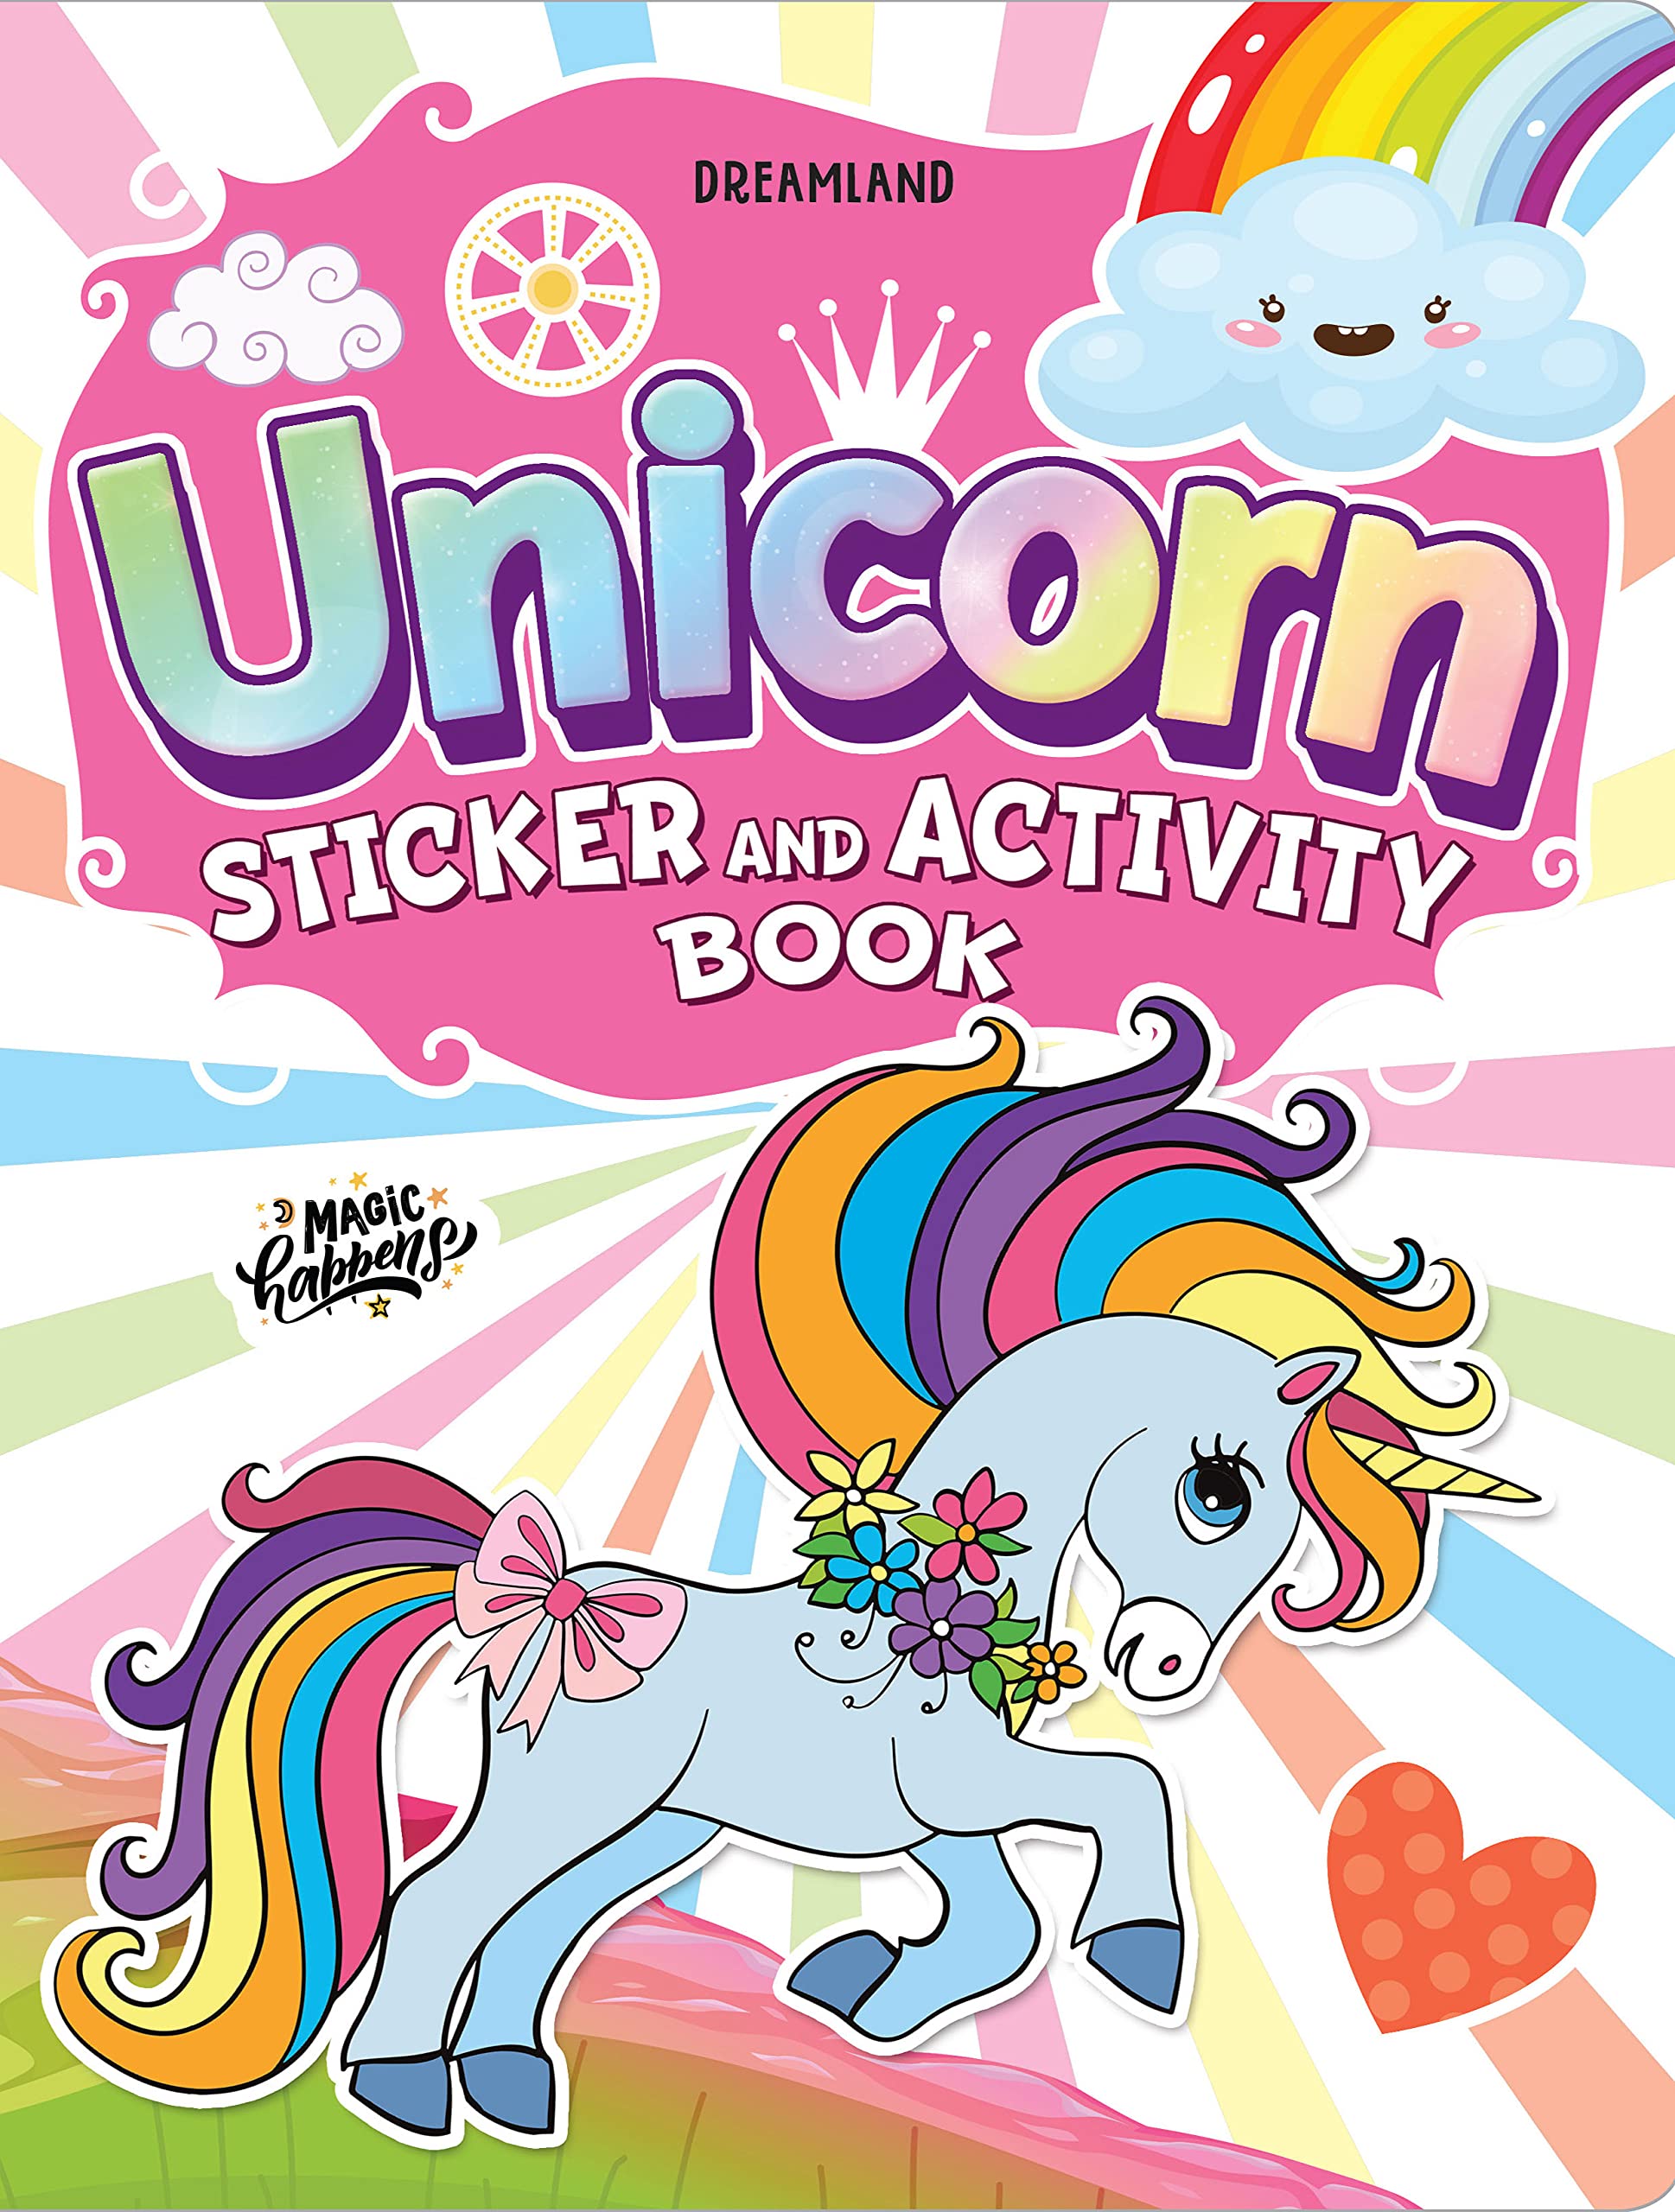 Unicorn Sticker and Activity Book for Children Age 3 - 8 Years